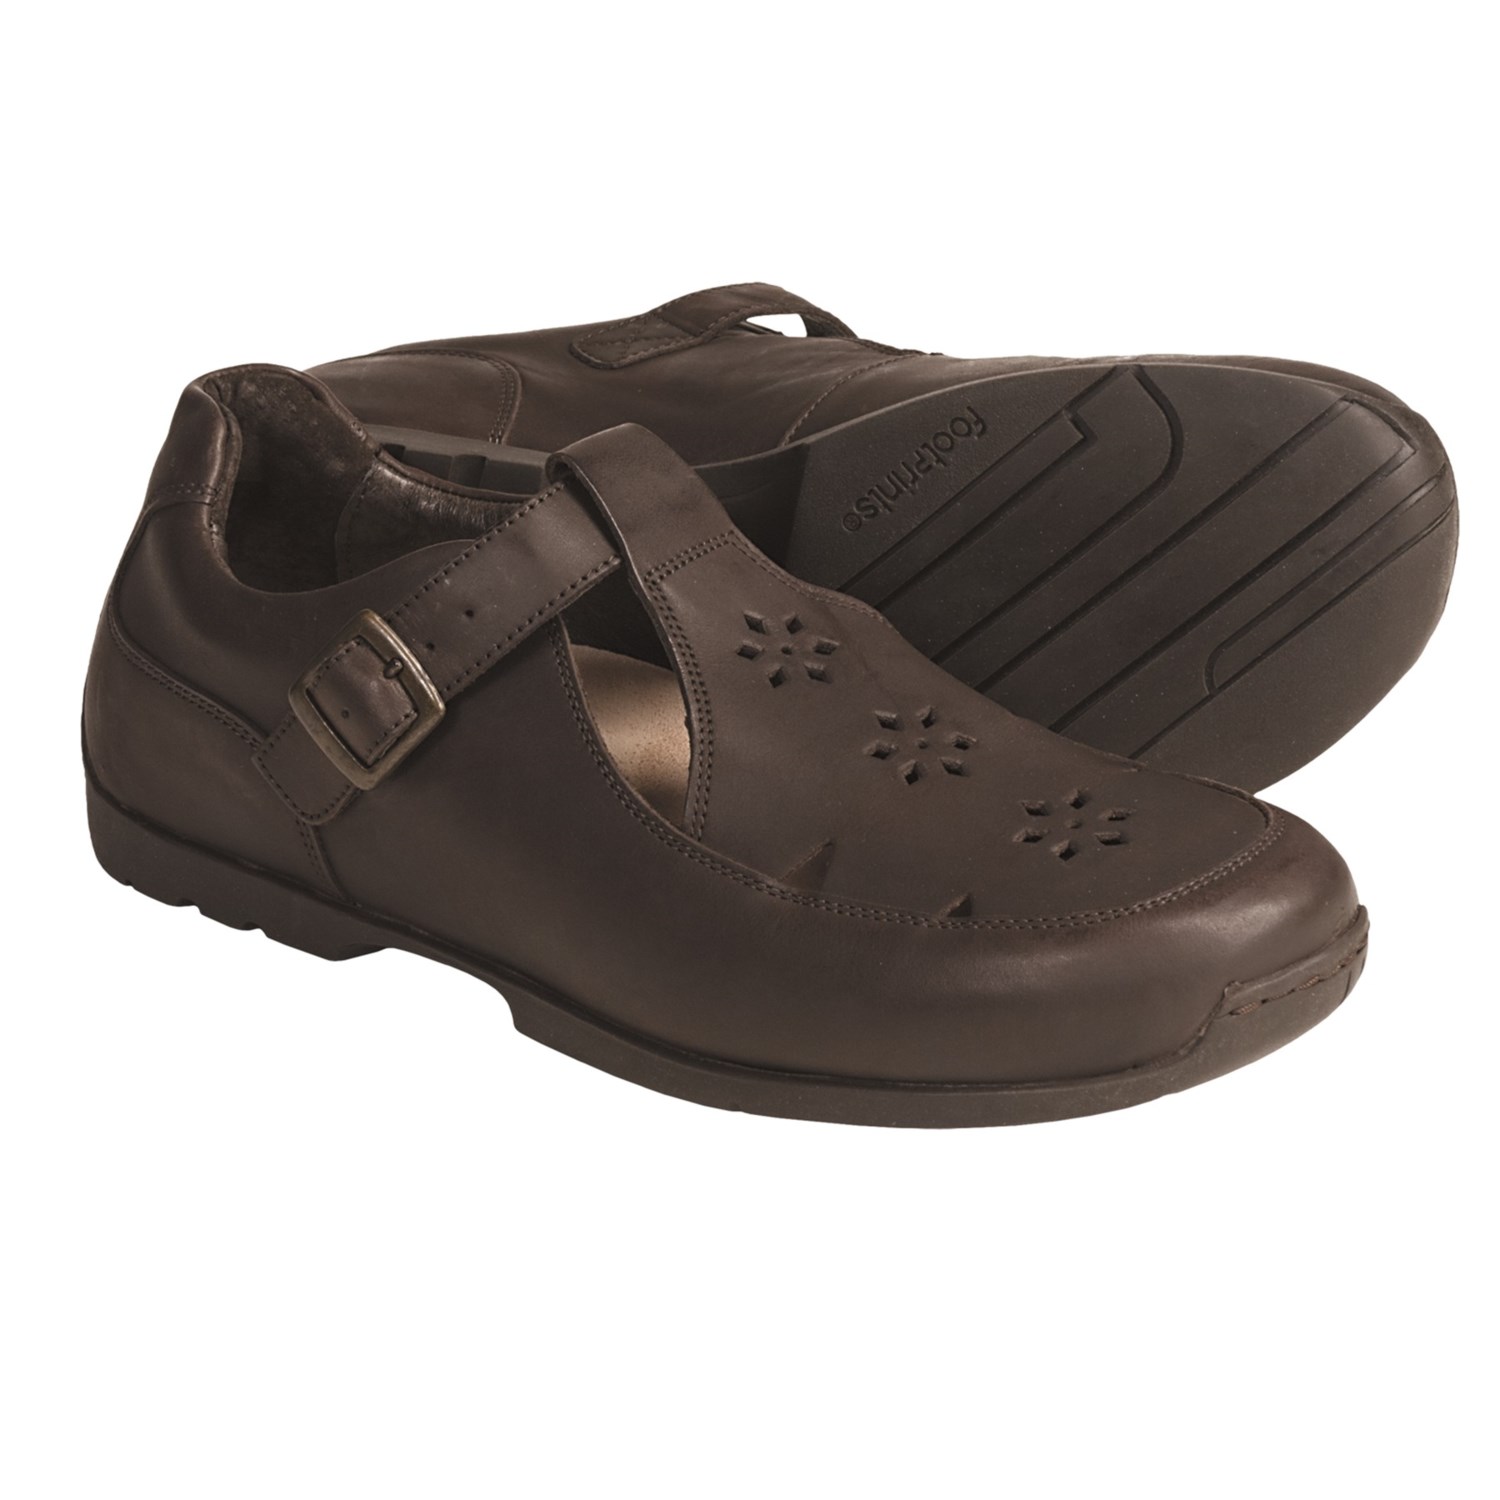 Footprints by Birkenstock Beverley Shoes - Mary Janes, Leather (For ...